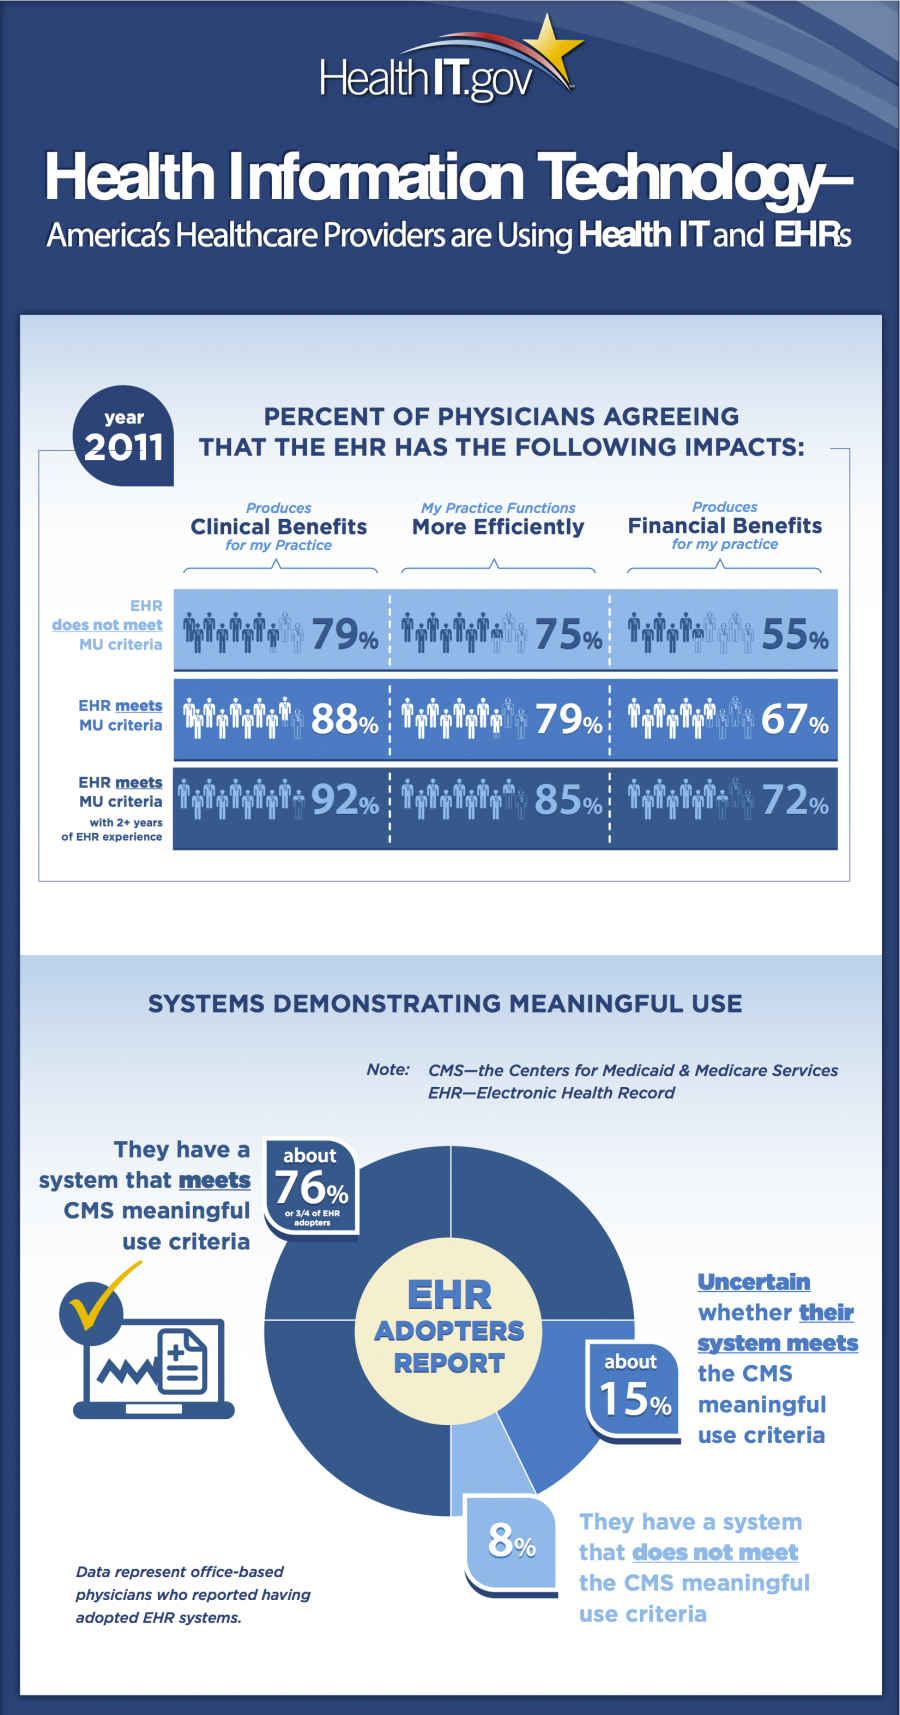 America’s Healthcare Providers are Using Health IT and EHRs Infographic Image